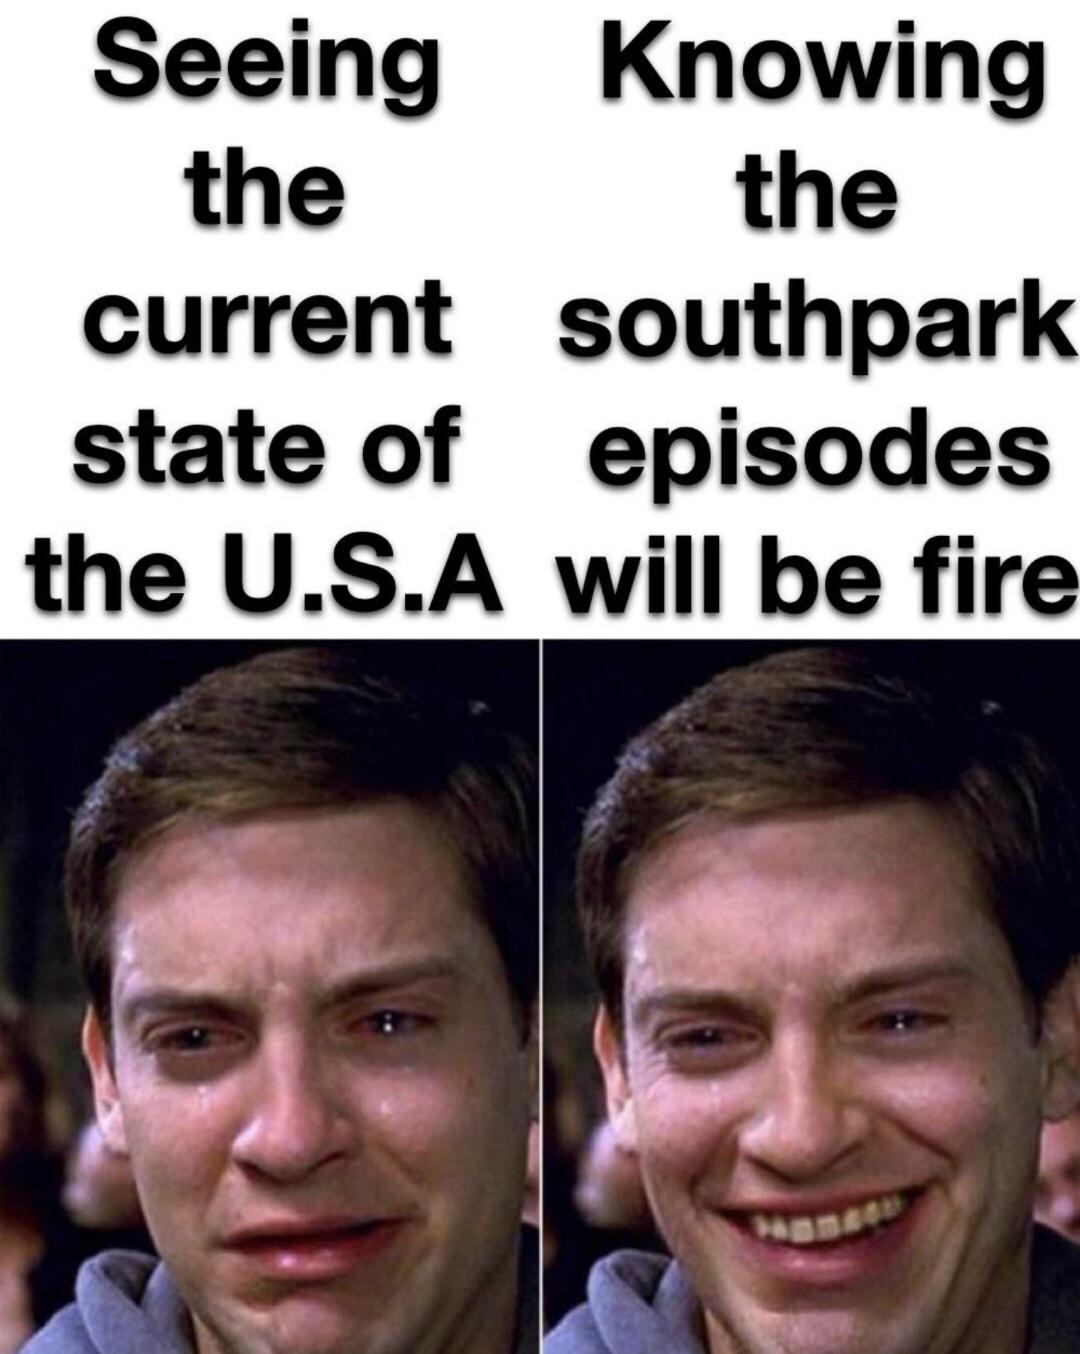 peter parker meme template - Seeing Knowing the the current southpark state of episodes the U.S.A will be fire